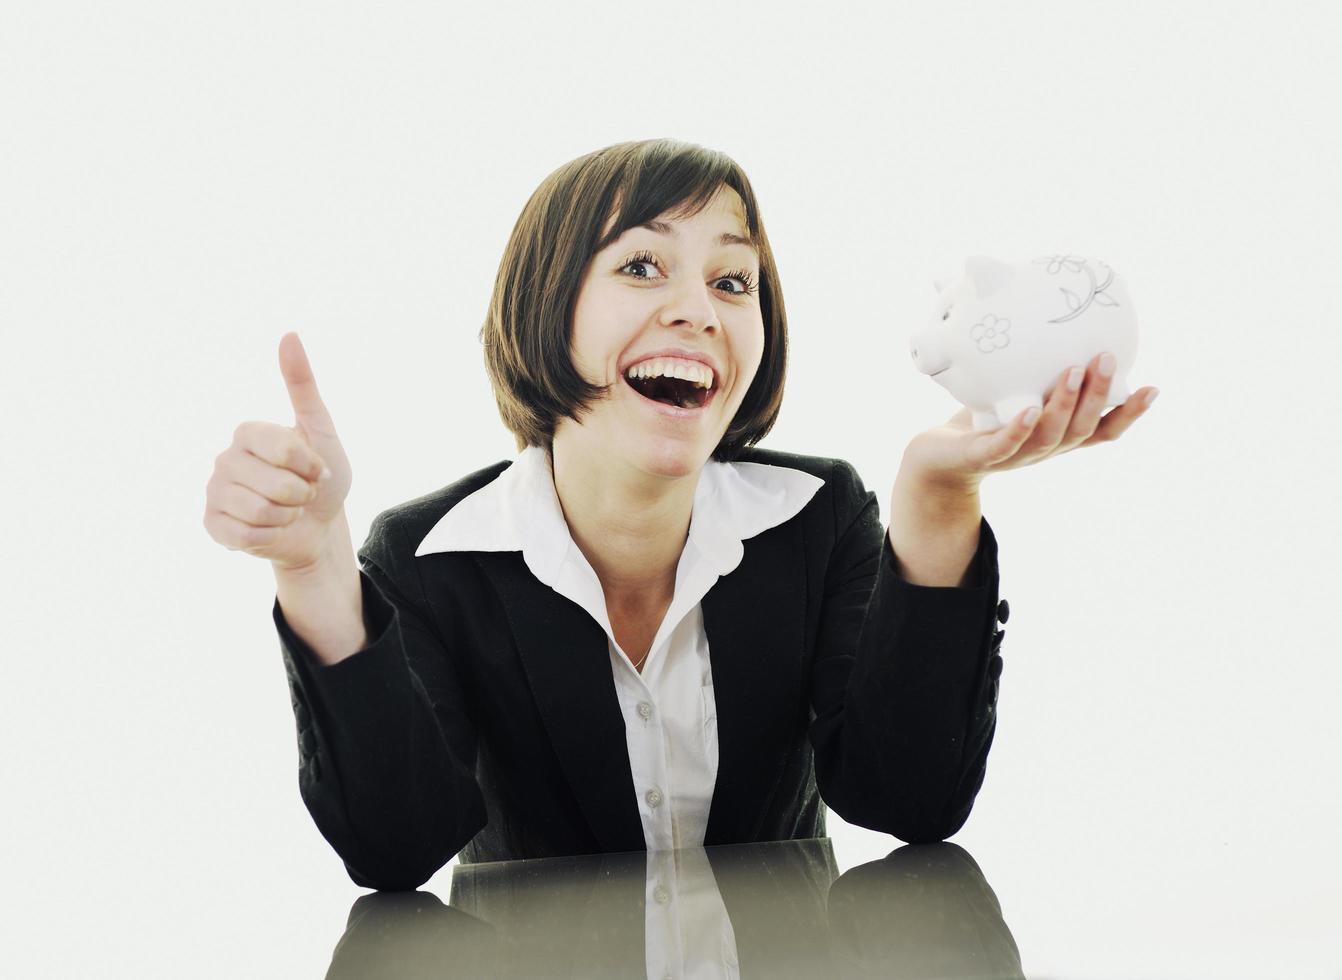 business woman putting coins money in piggy bank photo